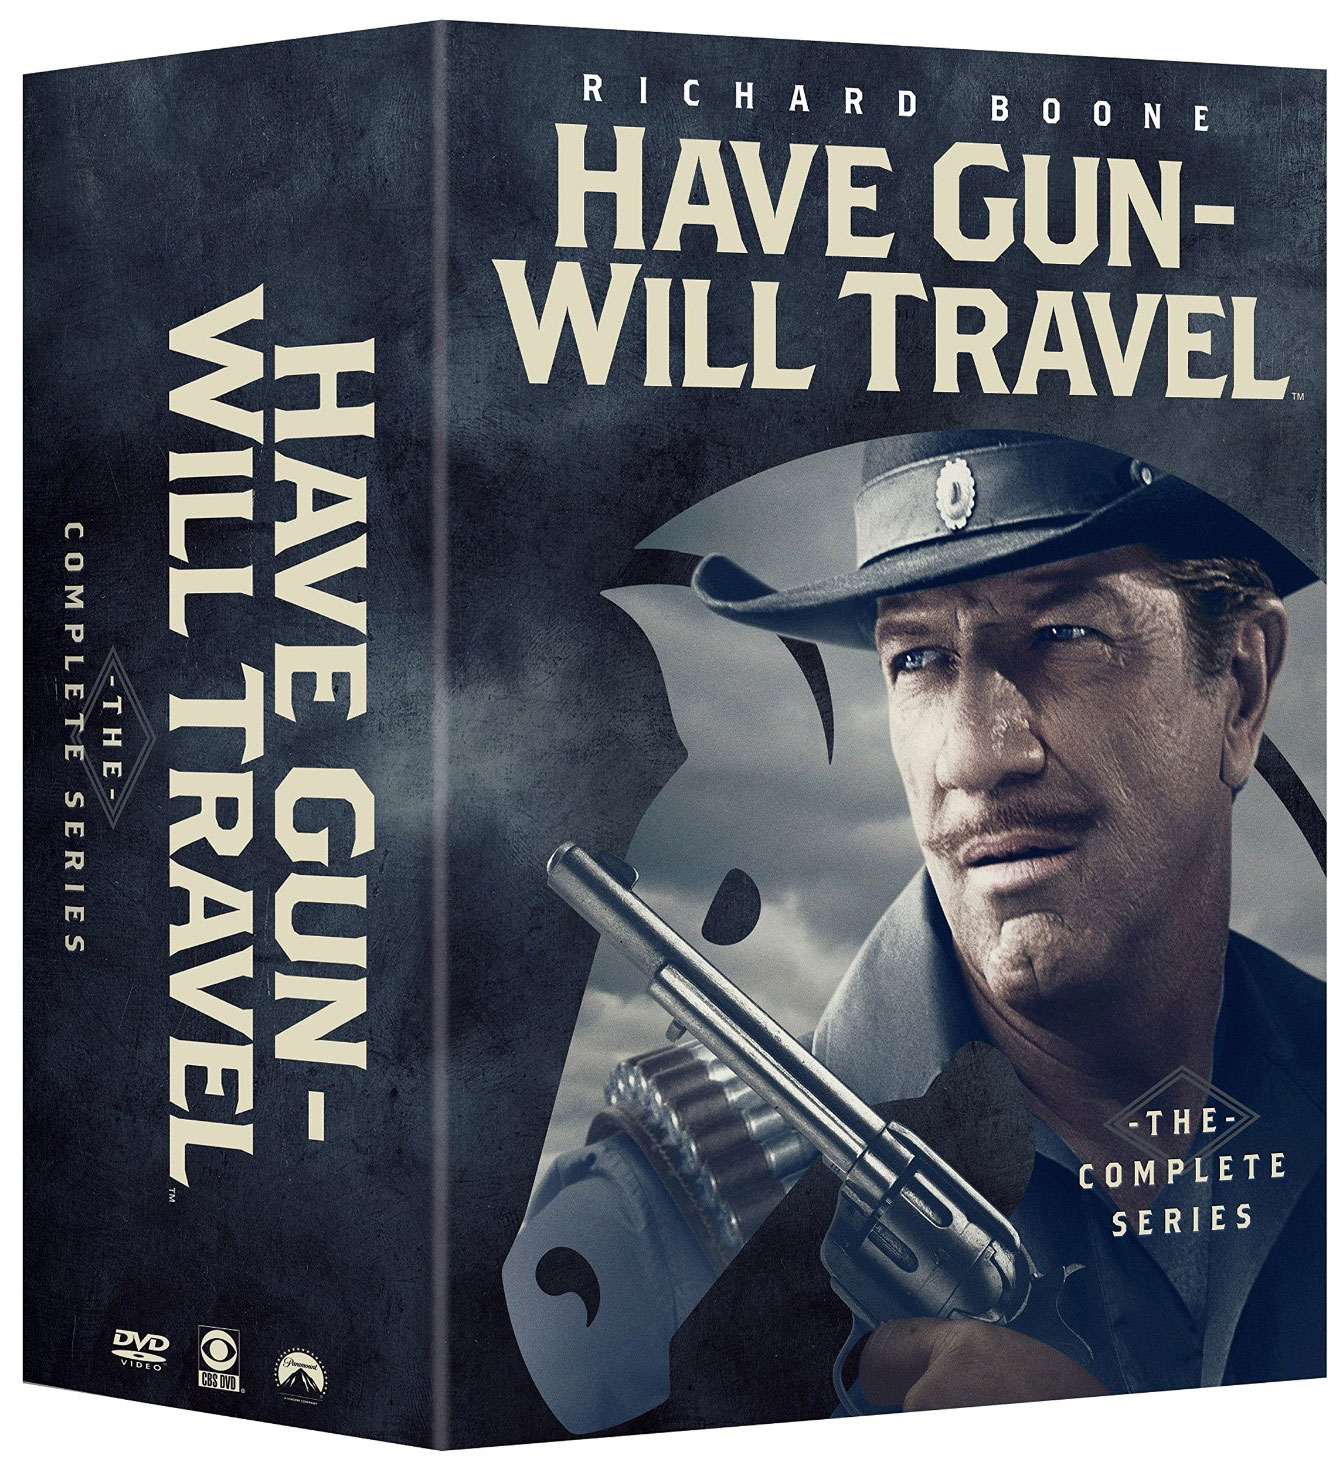 Have Gun, Will Travel: The Complete Series